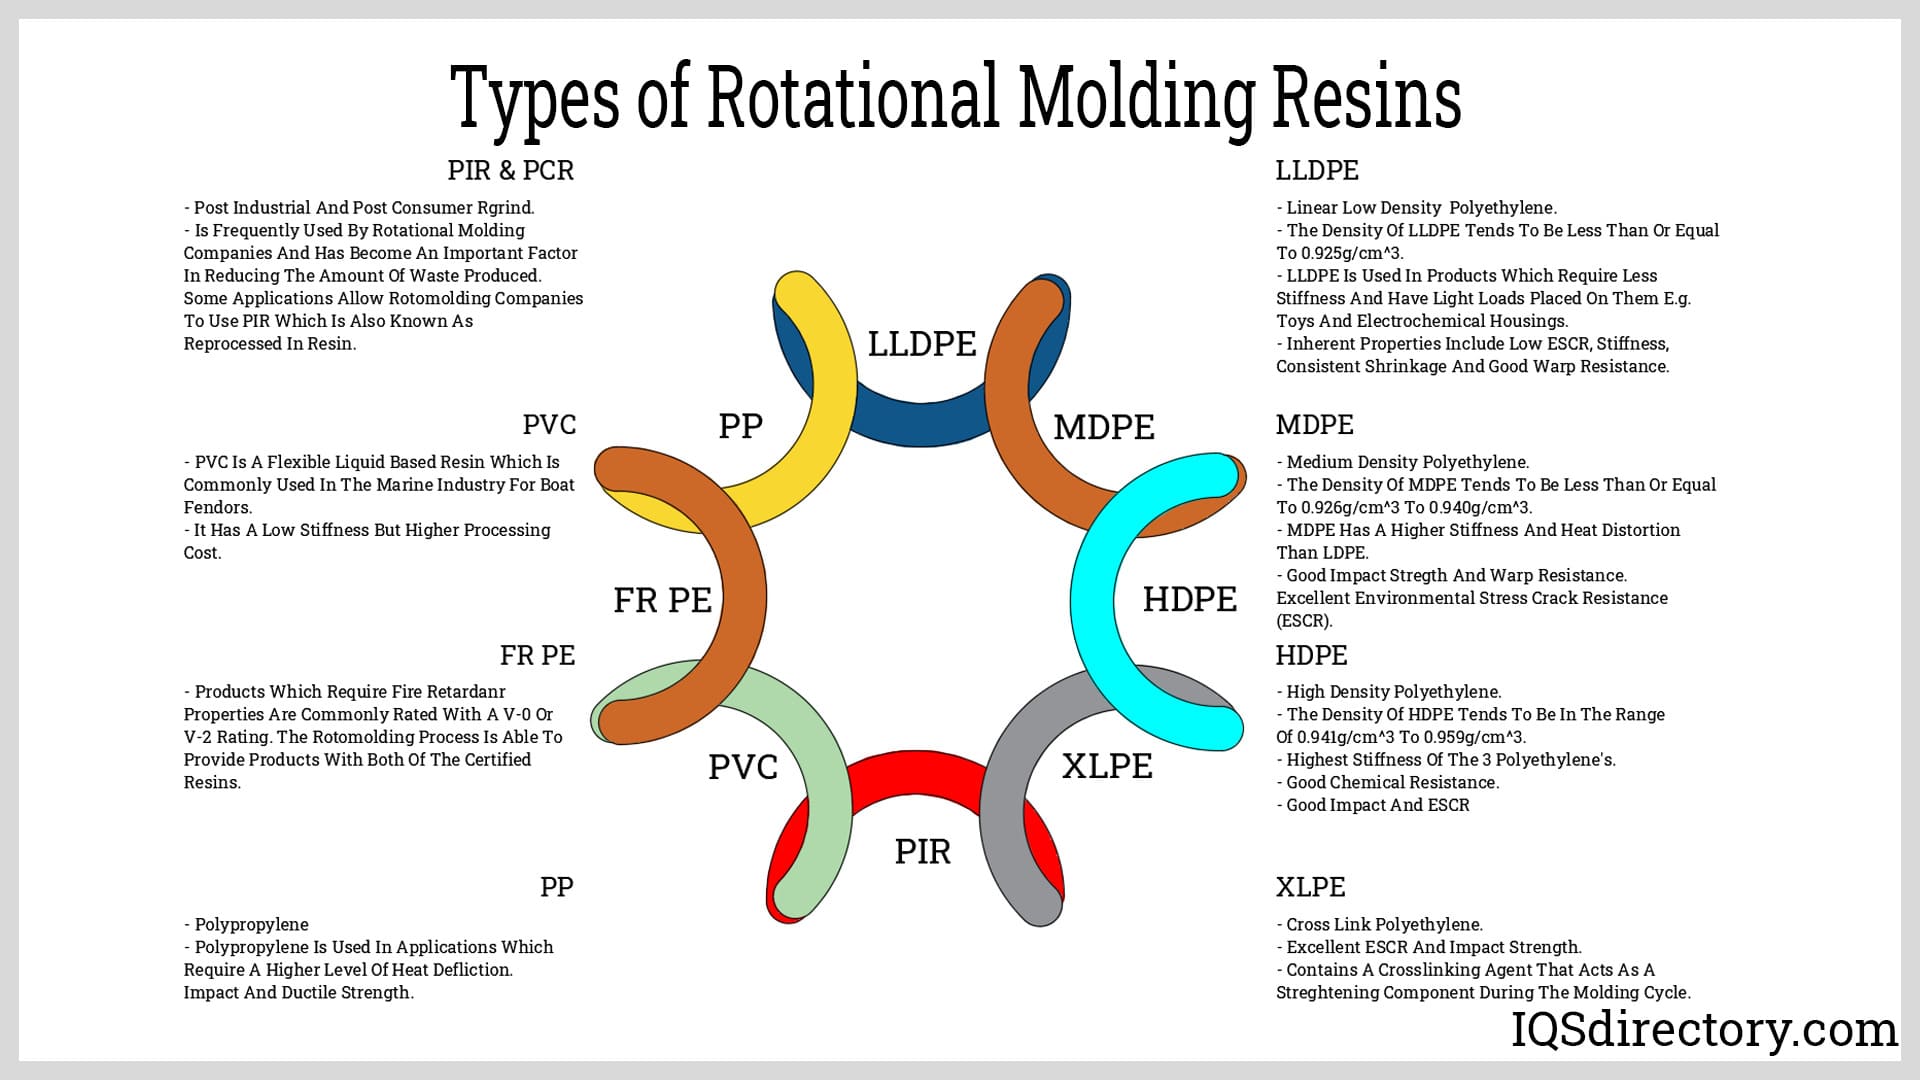 Types of Rotational Molding Resins